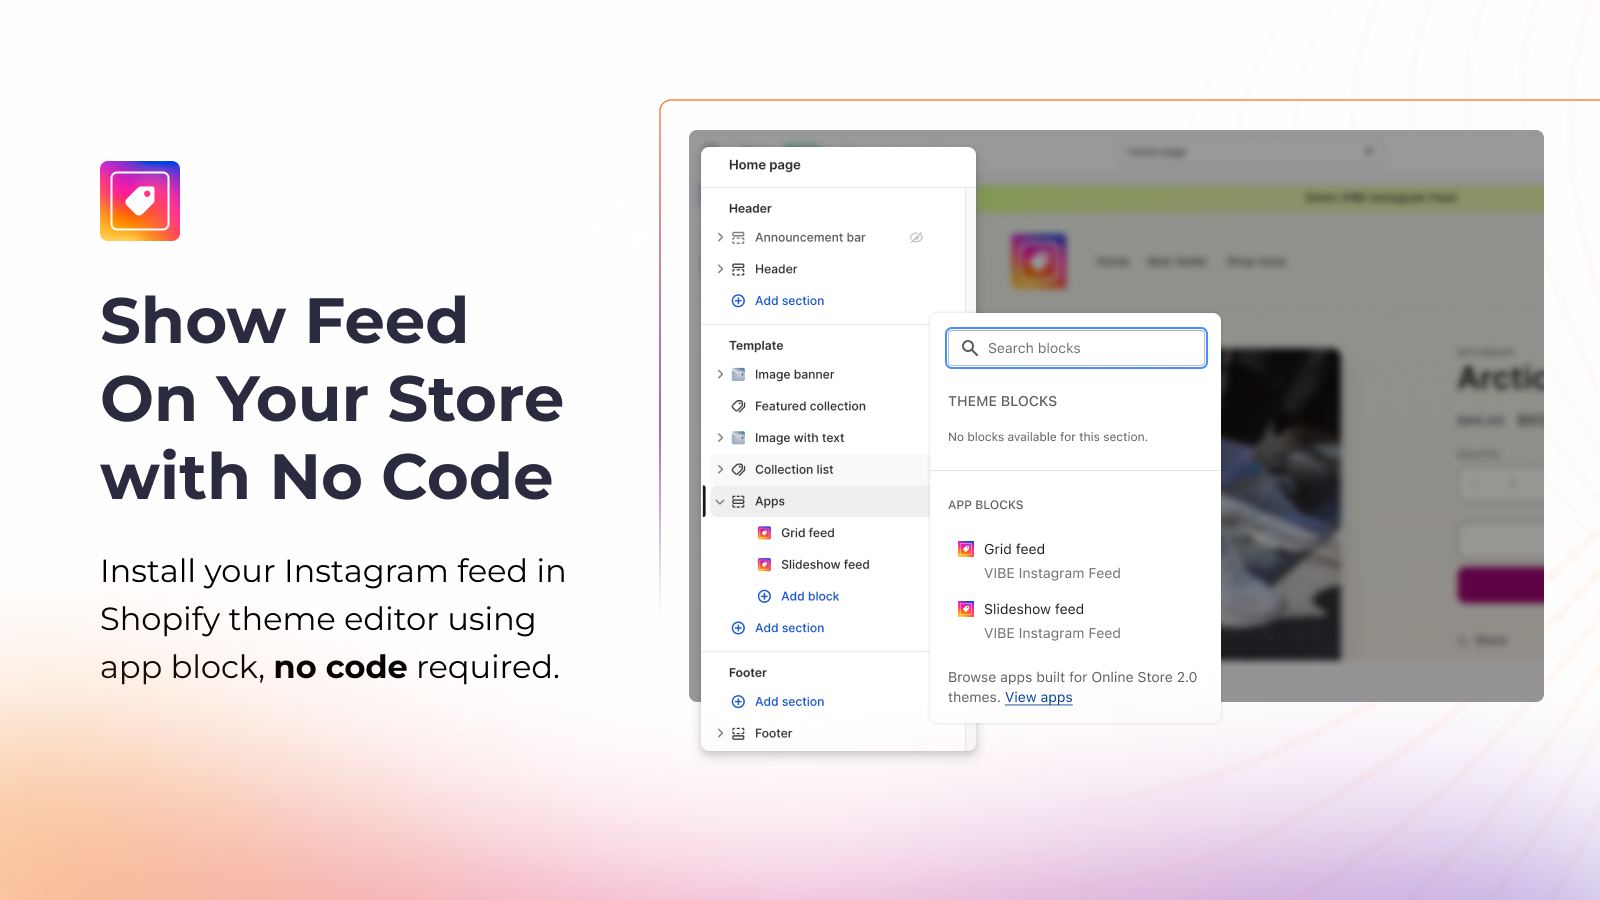 vibe instagram feed helps show feed on store with now code